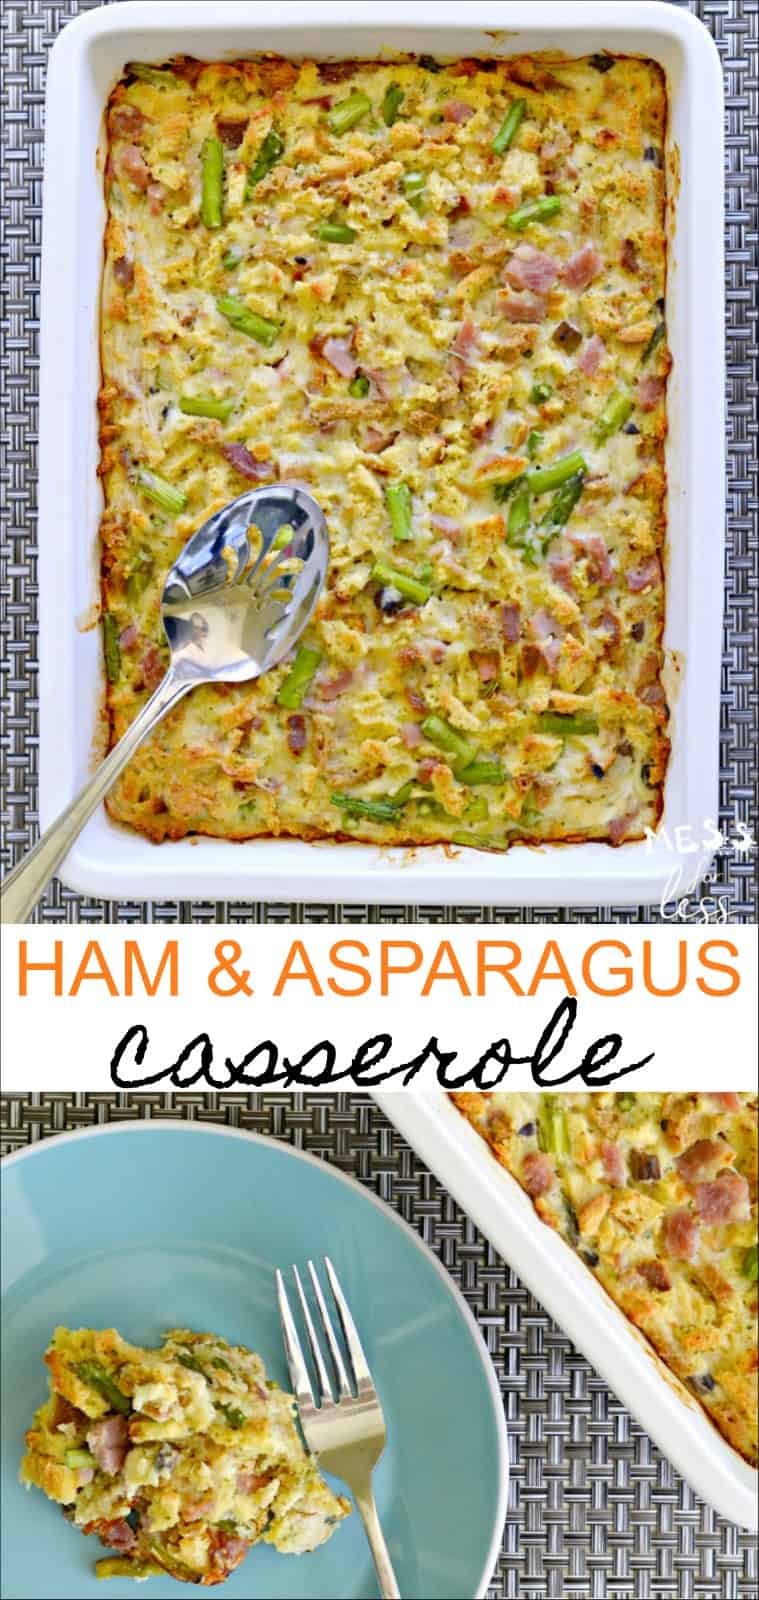 This hearty and delicious Ham and Asparagus Casserole Recipe has it all. You get protein and veggies and bread in the form of stuffing. It works for breakfast, brunch or as a side dish at dinner. This casserole is also super popular at potlucks. #casserole #casserolerecipe #breakfastcasserole